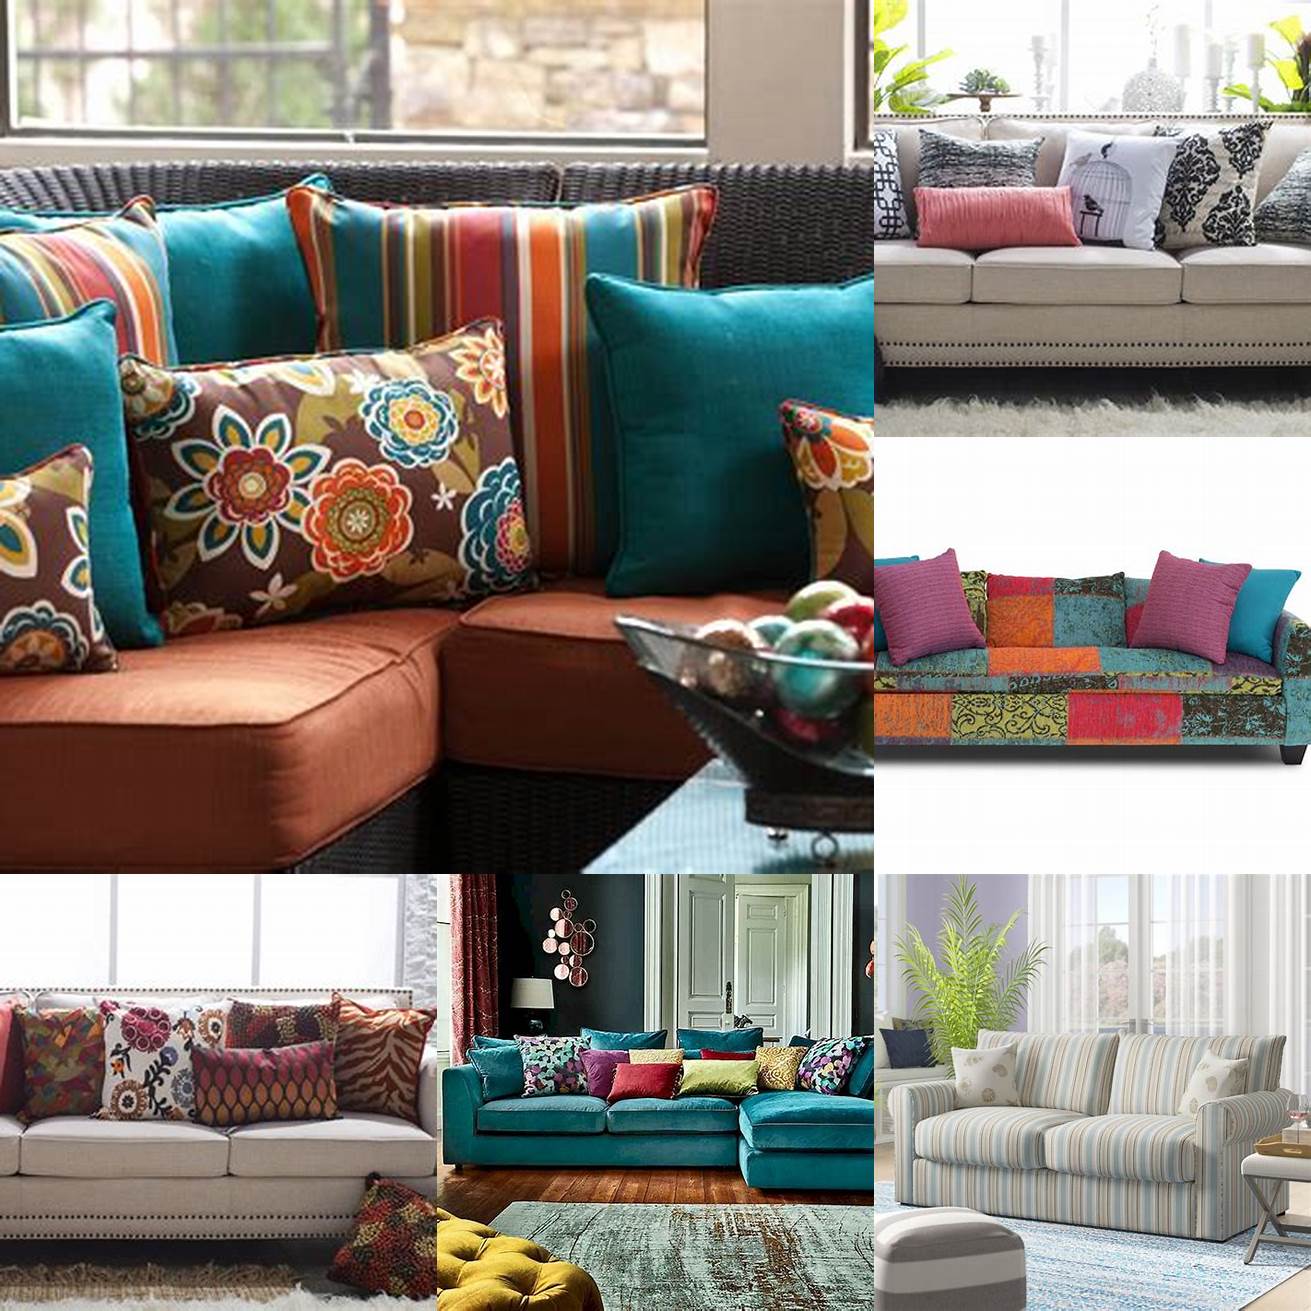 Colorful patterned fabric sofa with matching pillows